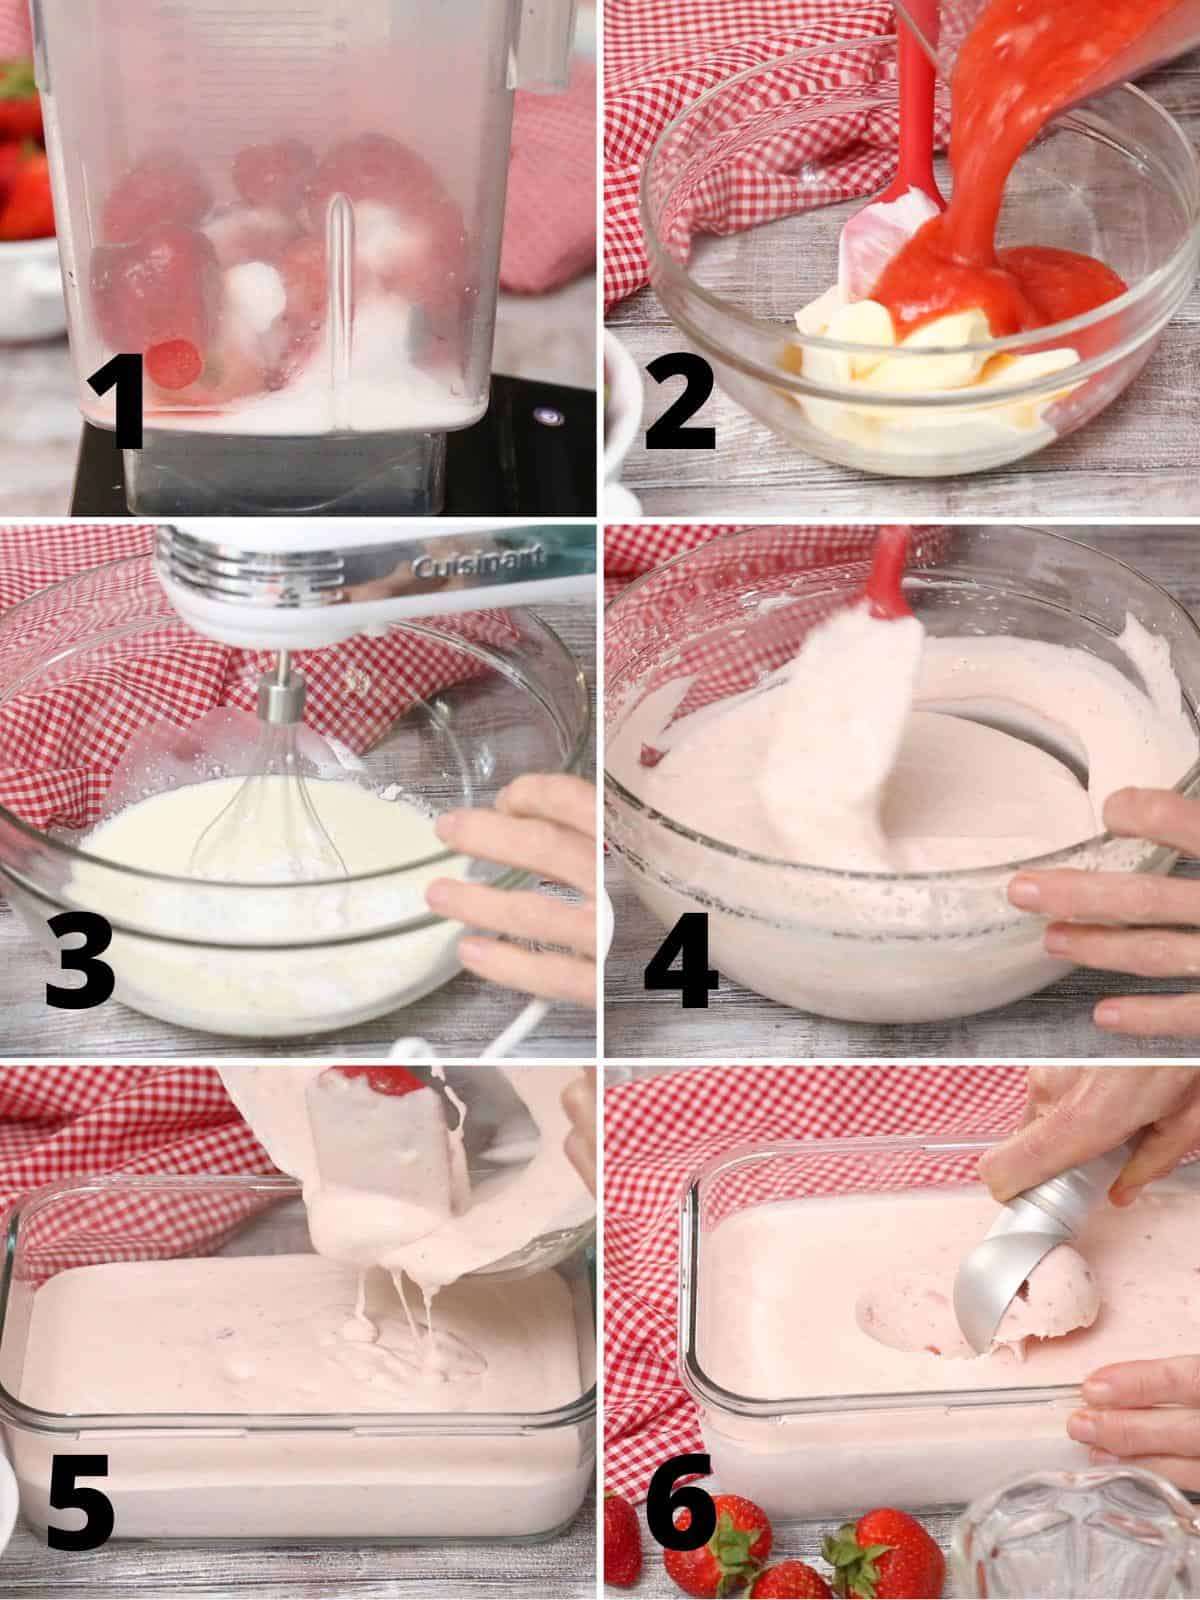 6 images showing the steps for making no-churn keto strawberry ice cream.